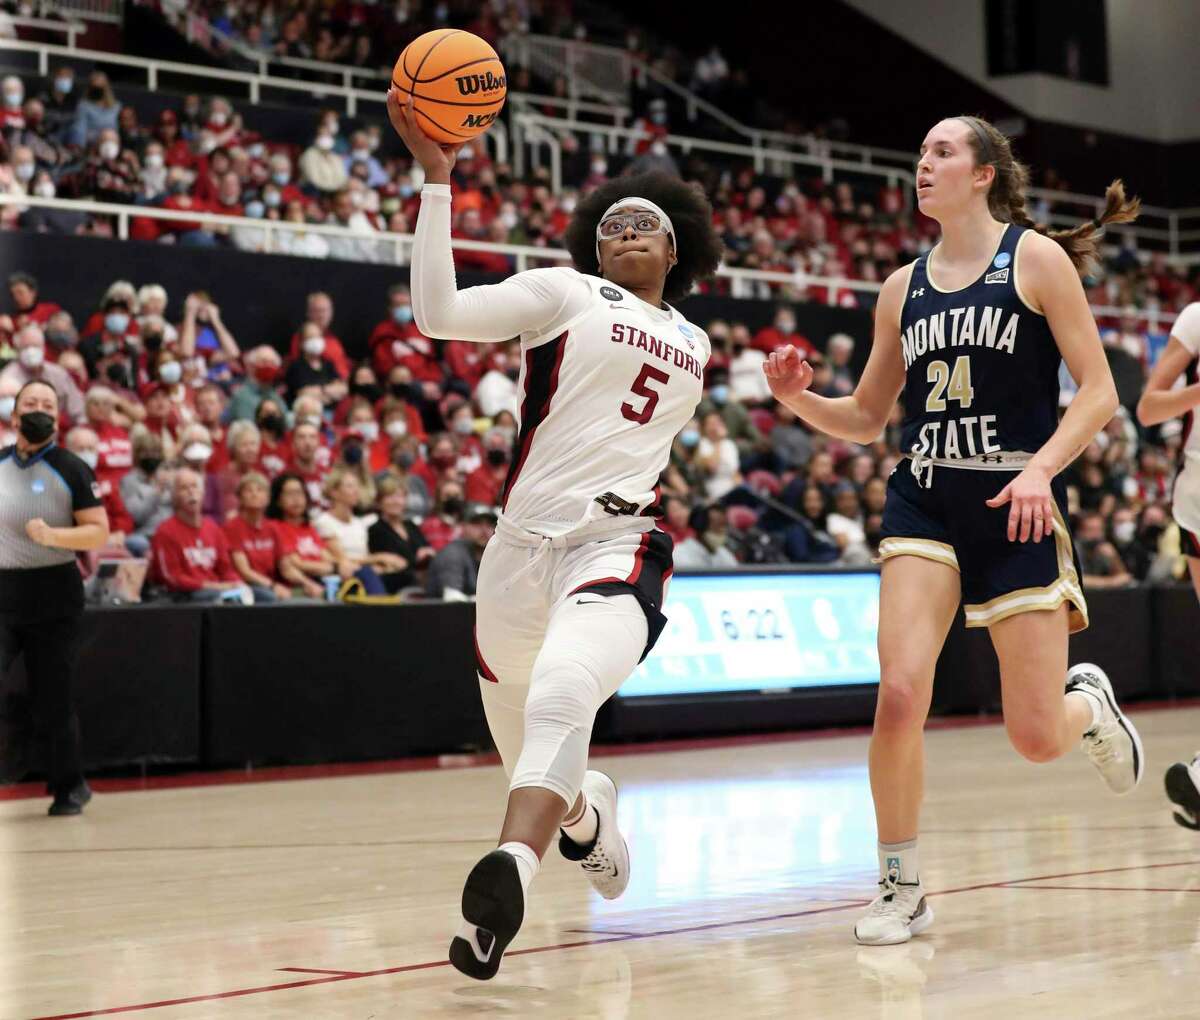 Francesca Belibi (5) and her Stanford teammates will face Kansas in an NCAA Tournament game at Maples Pavilion at 6 p.m. Sunday. (ESPN)